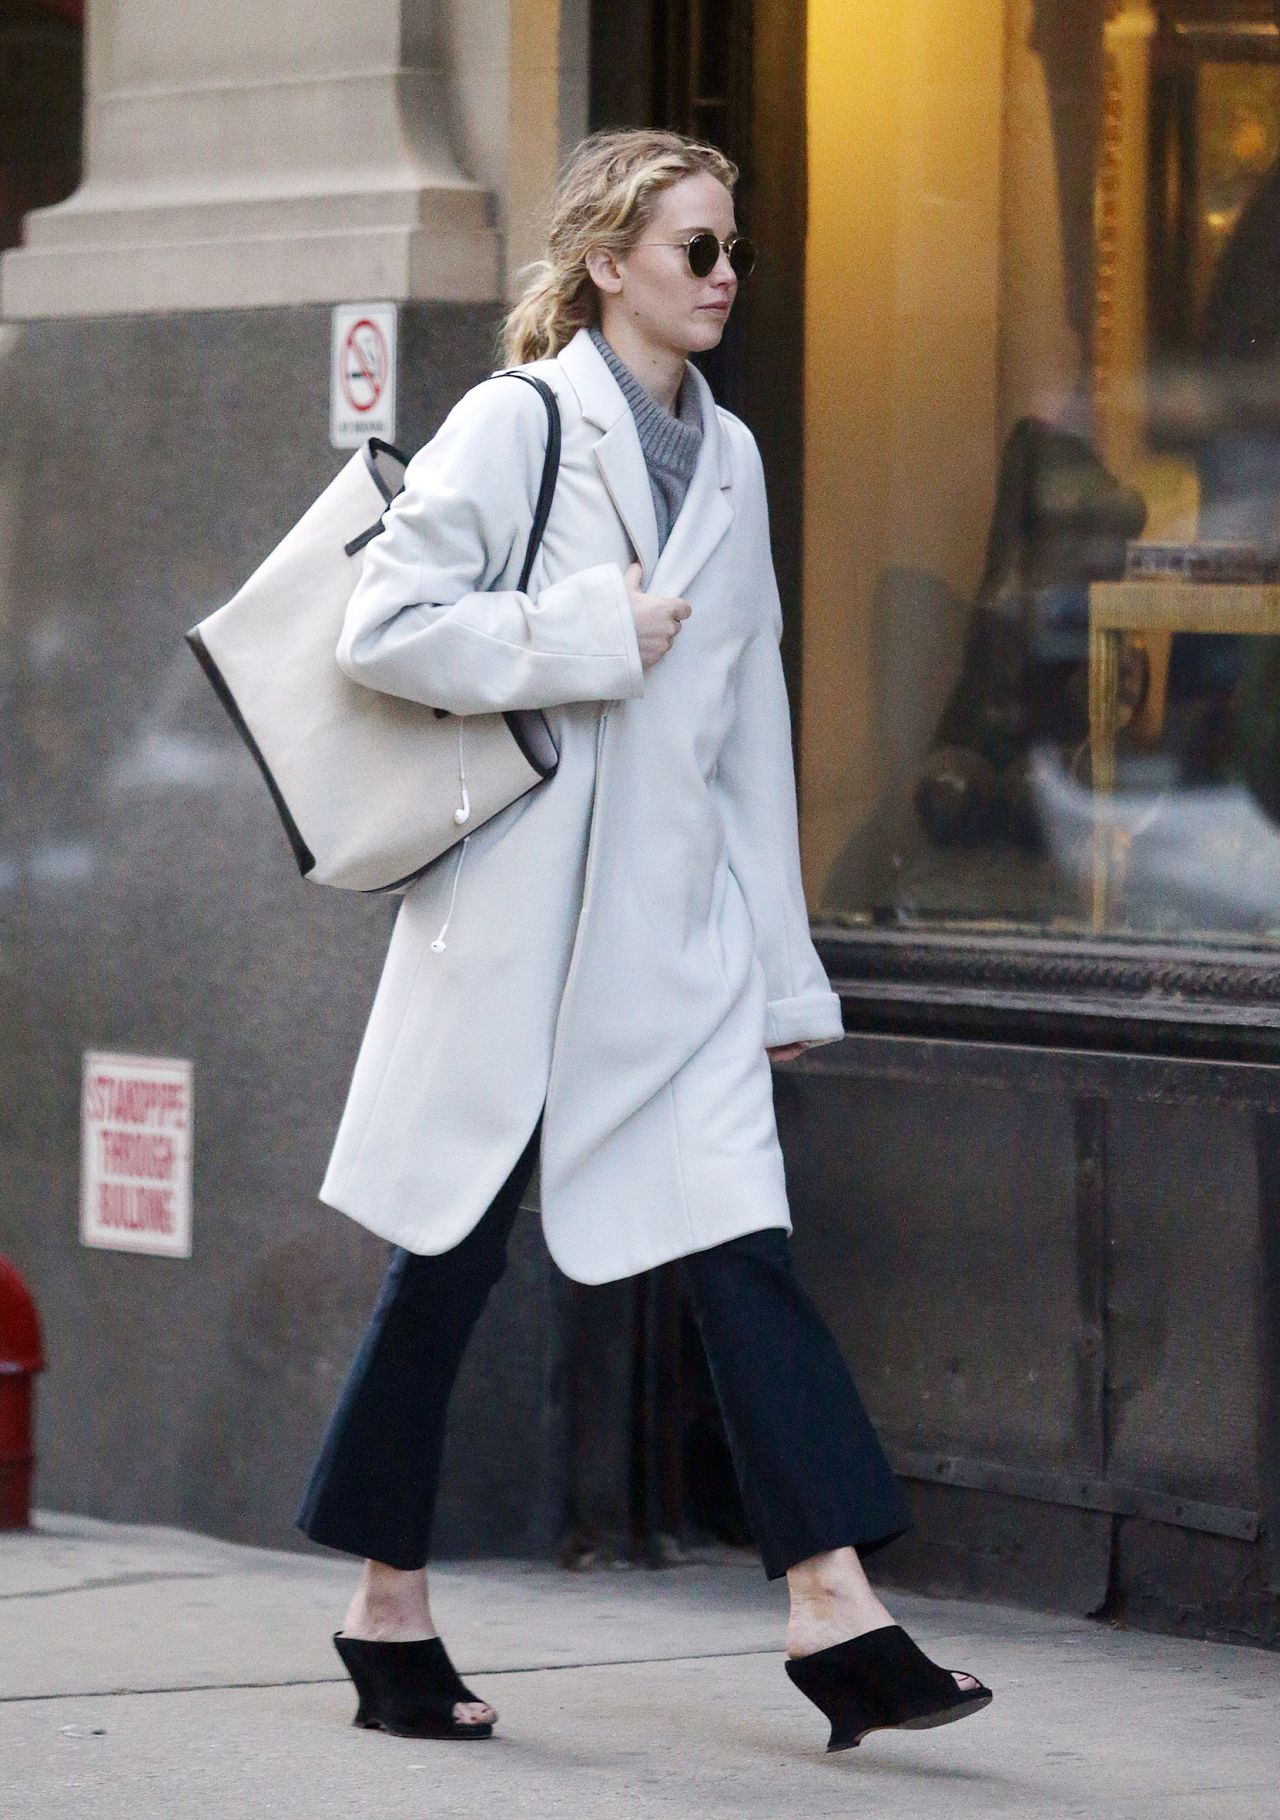 Jennifer Lawrence - Out in New York City 03/14/2019